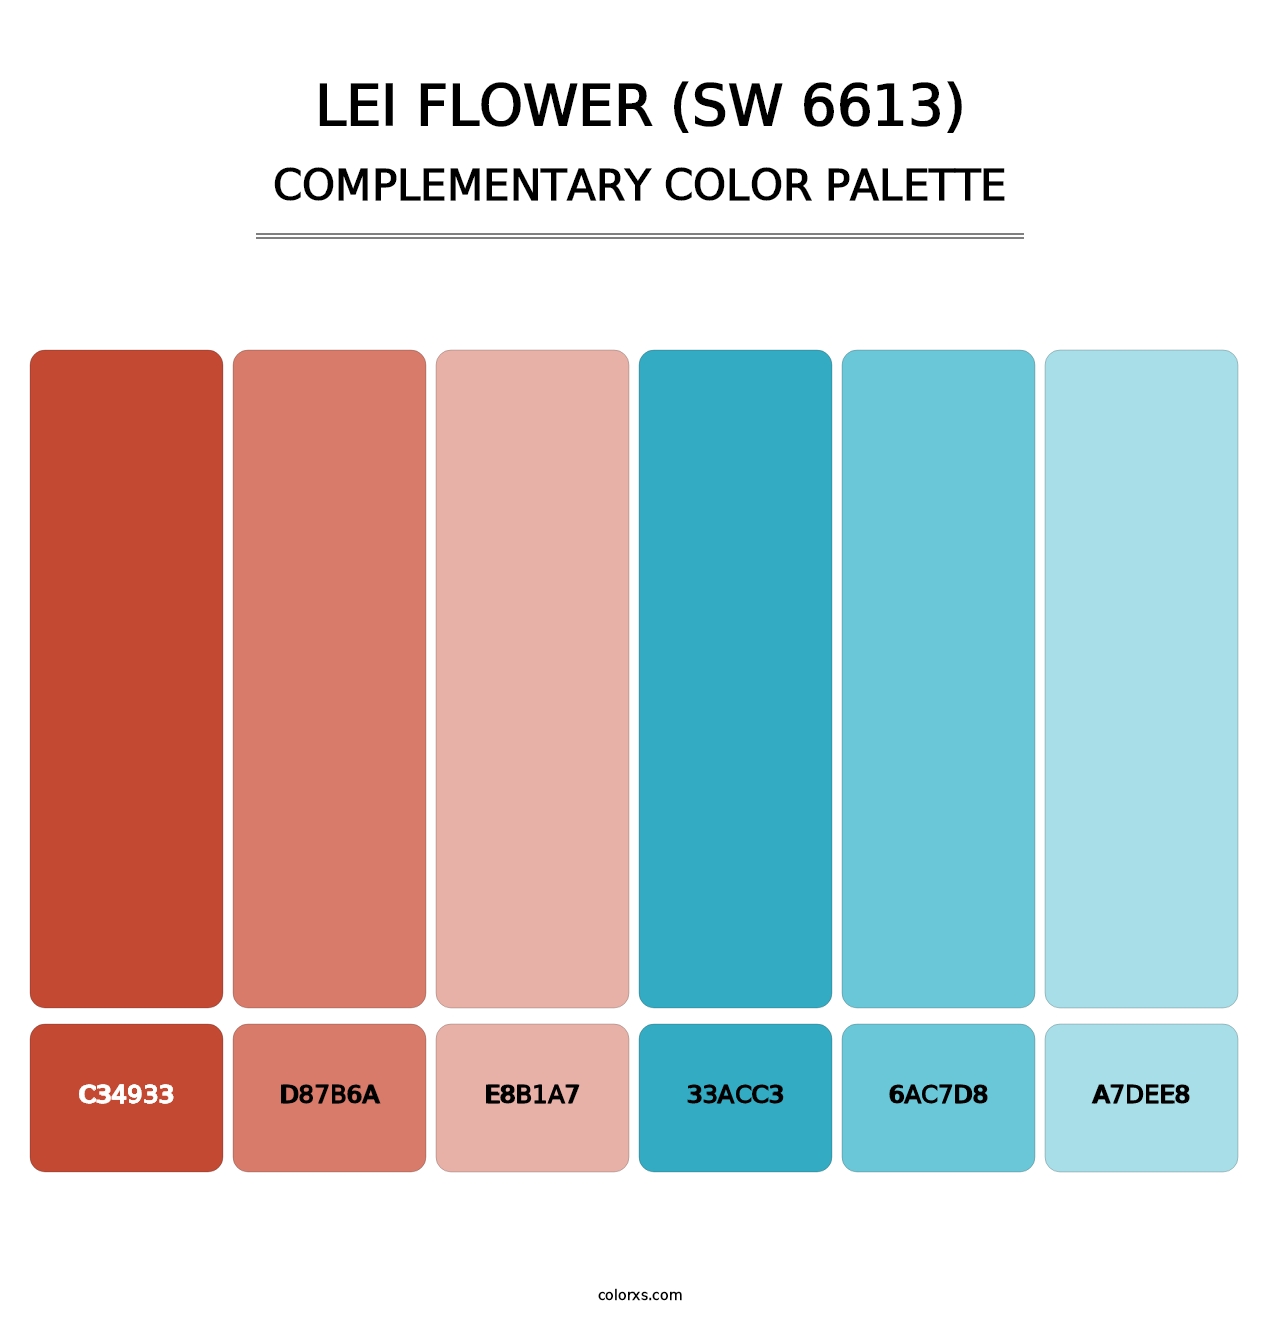 Lei Flower (SW 6613) - Complementary Color Palette